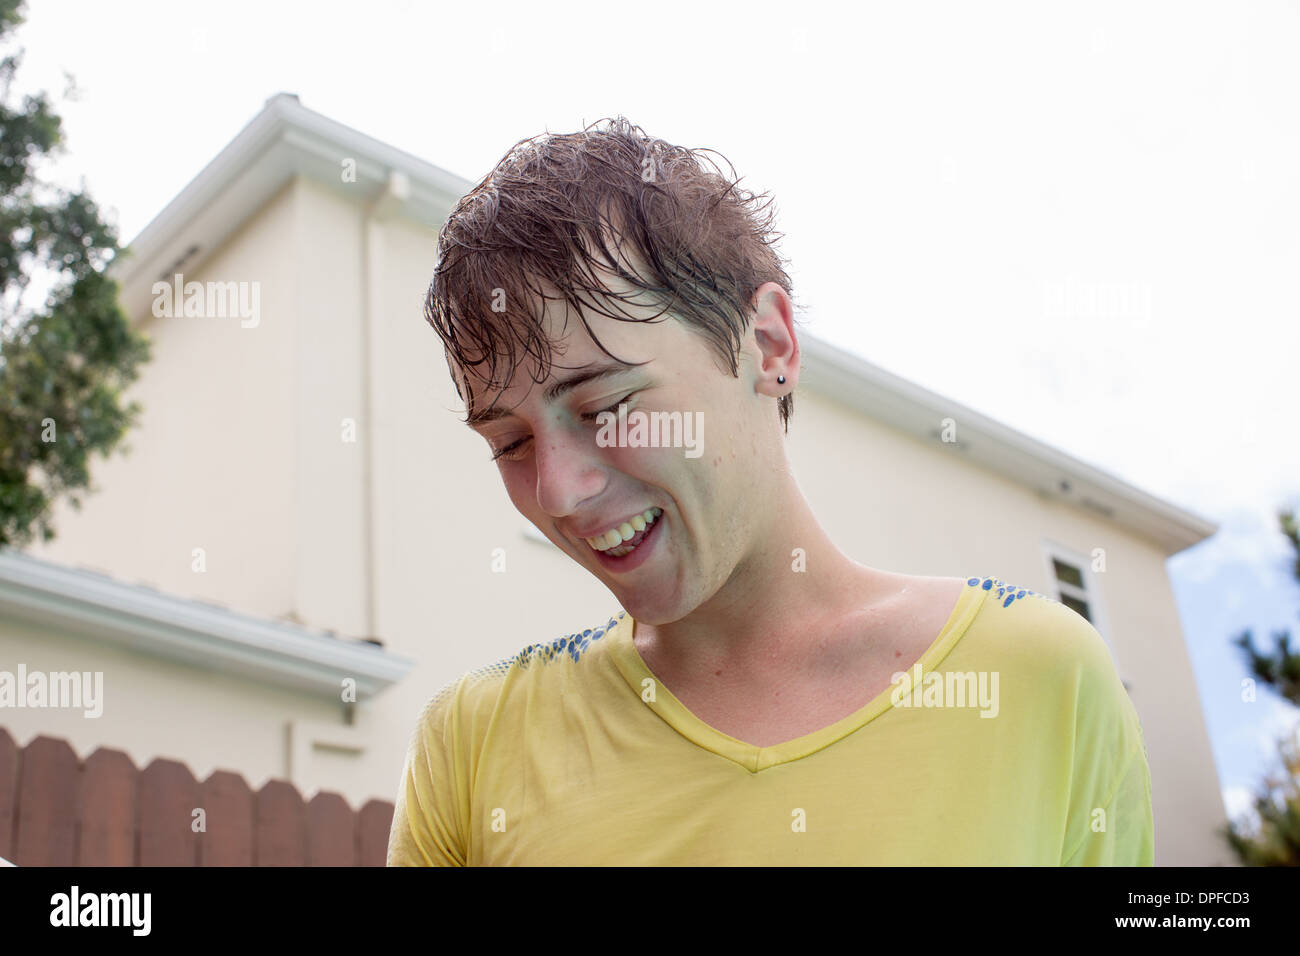 Young man with wet hair Stock Photo